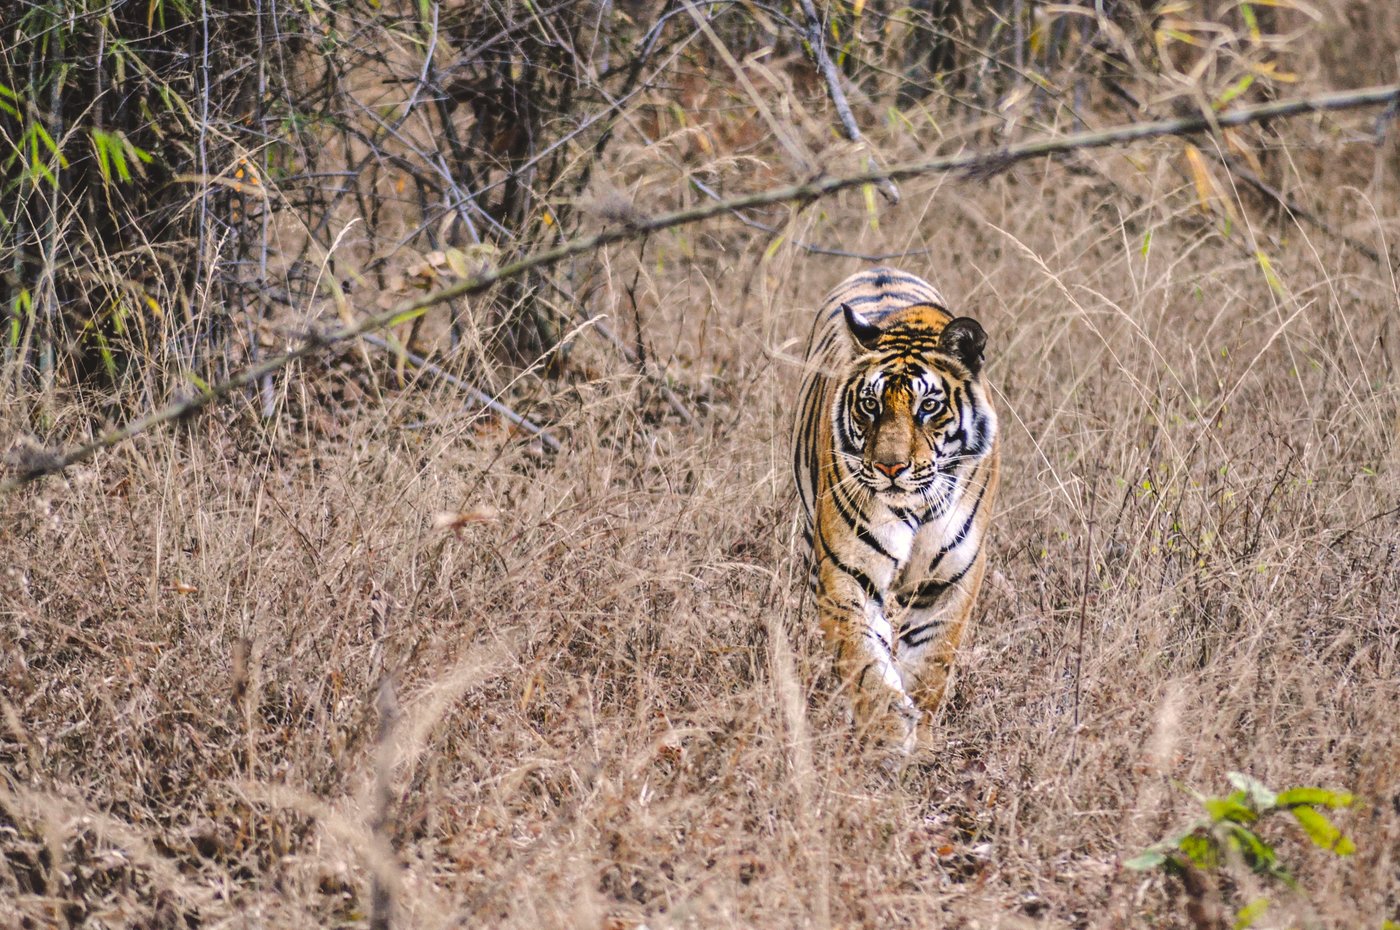 Which zone in Jim Corbett is best for tiger sighting?